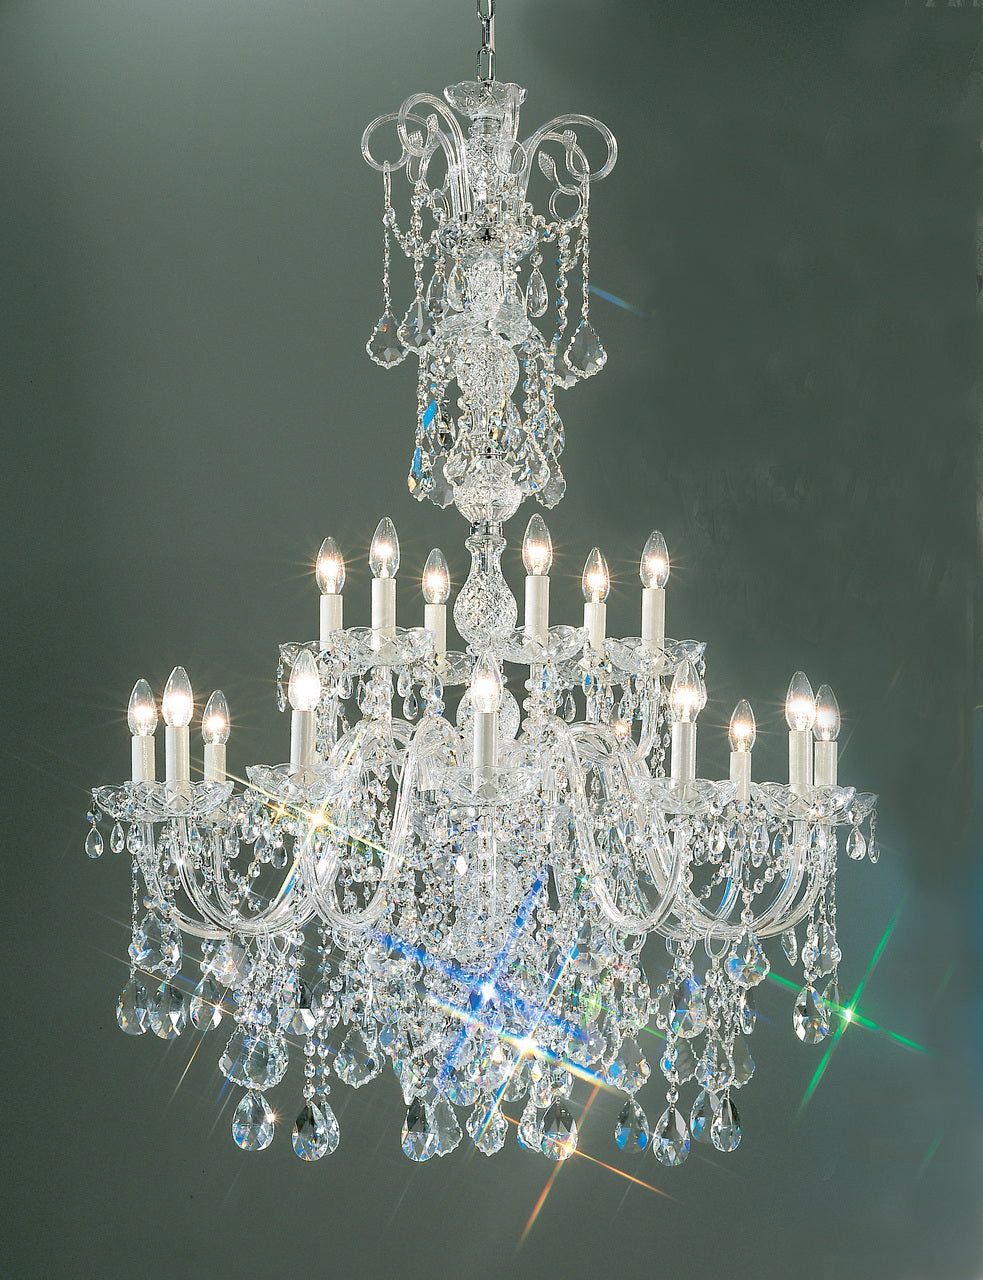 Classic Lighting 8263 G SC Bohemia Crystal/Glass Chandelier in 24k Gold (Imported from Italy)